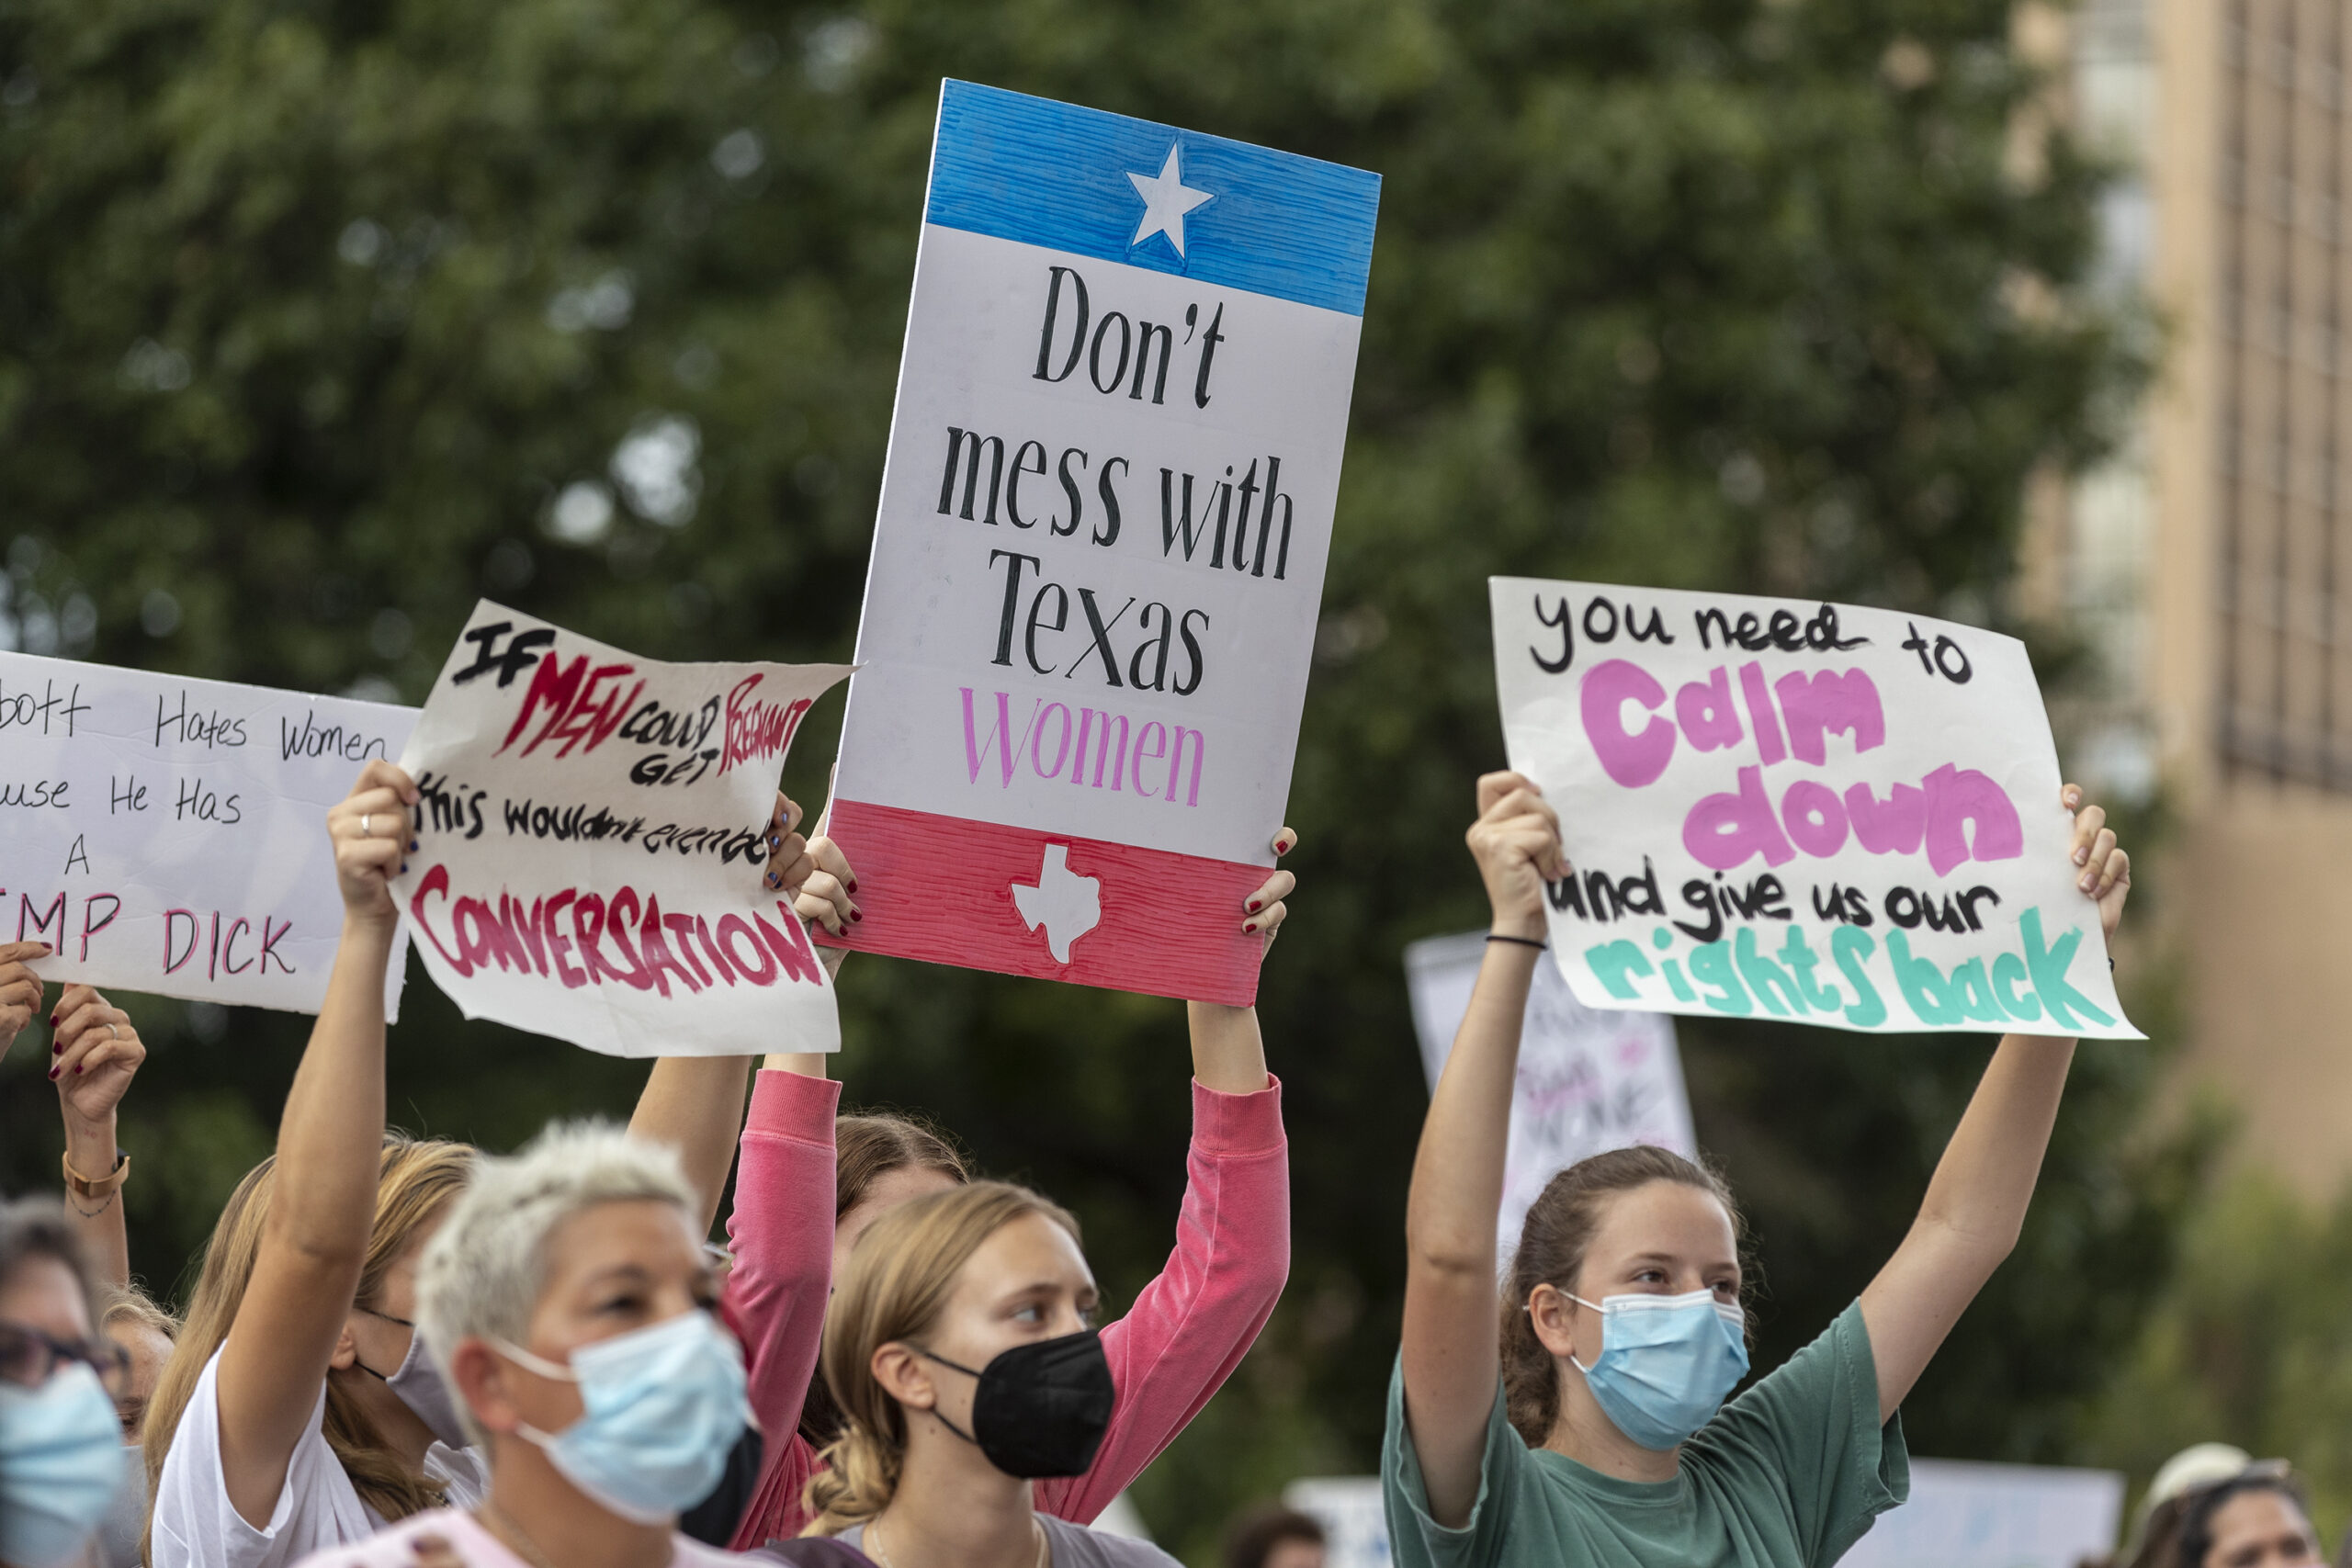 FILE - In this Oct. 2, 2021, file photo, people attend the Women's March ATX rally, at the Texas State Capitol in Austin, Texas. A federal judge has ordered Texas to suspend a new law that has banned most abortions in the state since September. The order Wednesday by U.S. District Judge Robert Pitman freezes for now the strict abortion law known as Senate Bill 8. (AP Photo/Stephen Spillman, File)